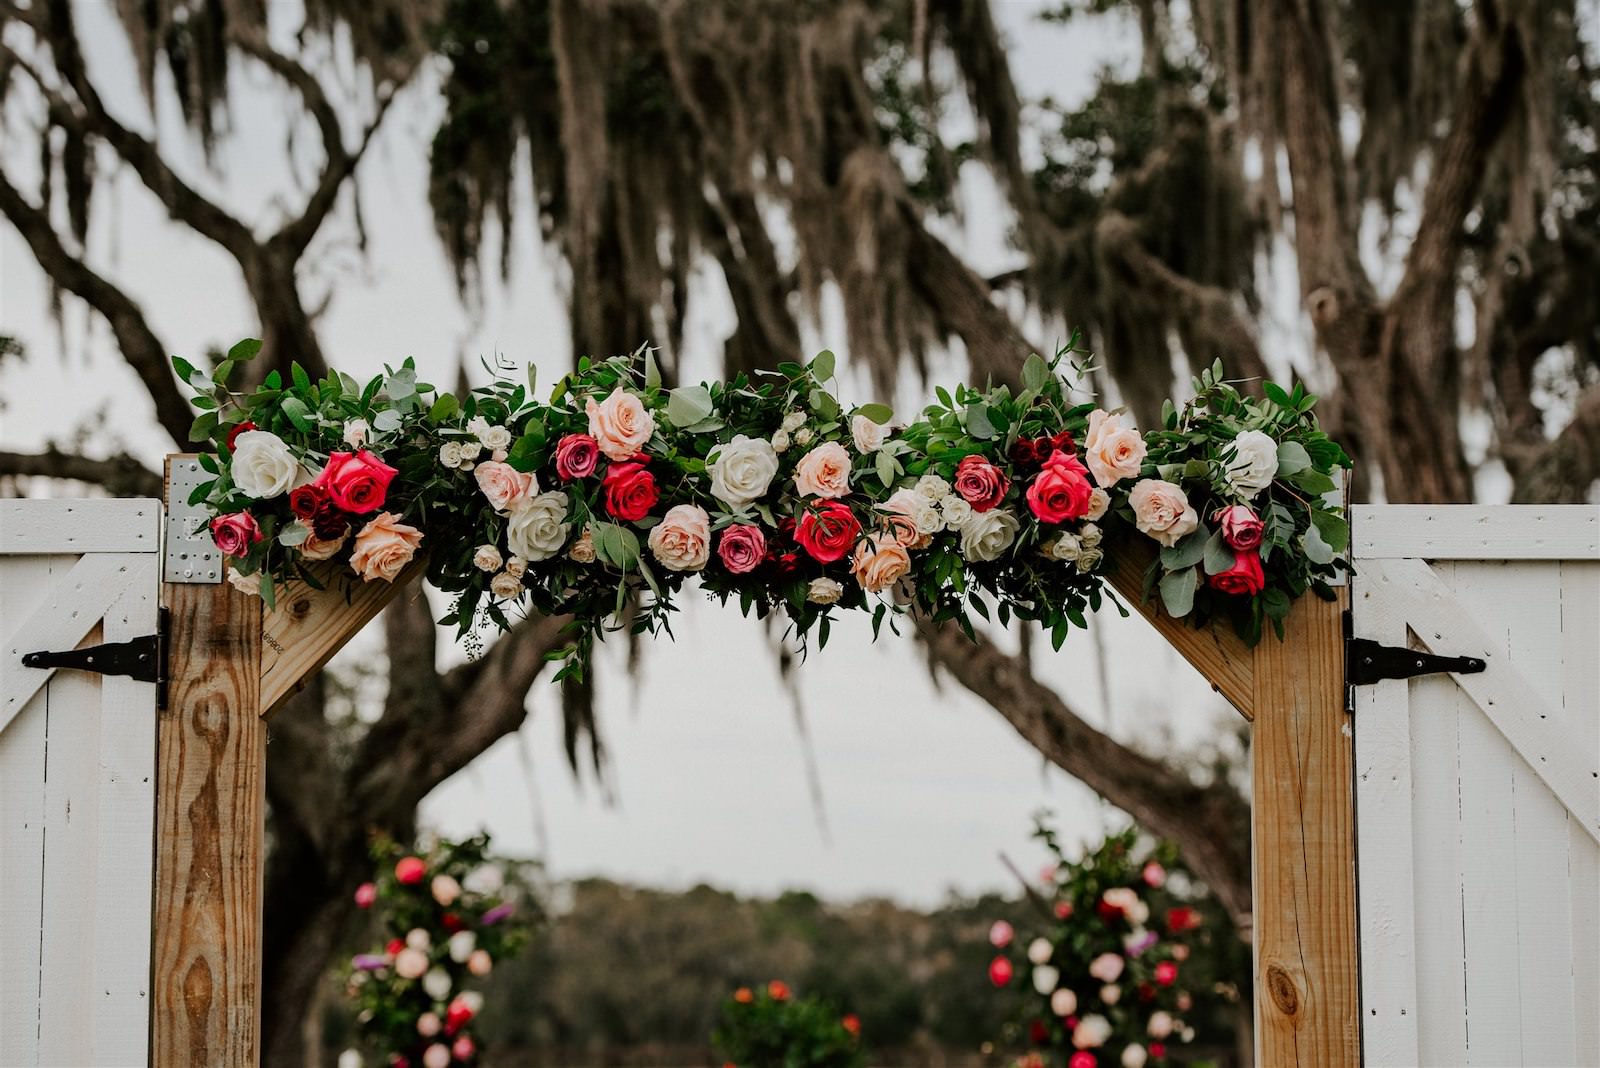 Wedding Barn Doors Entrance with Floral Garland | Tampa Wedding Florist Monarch Events and Designs | Deep Red Maroon Burgundy Roses and Blush Pink and White Roses with Eucalyptus Greenery